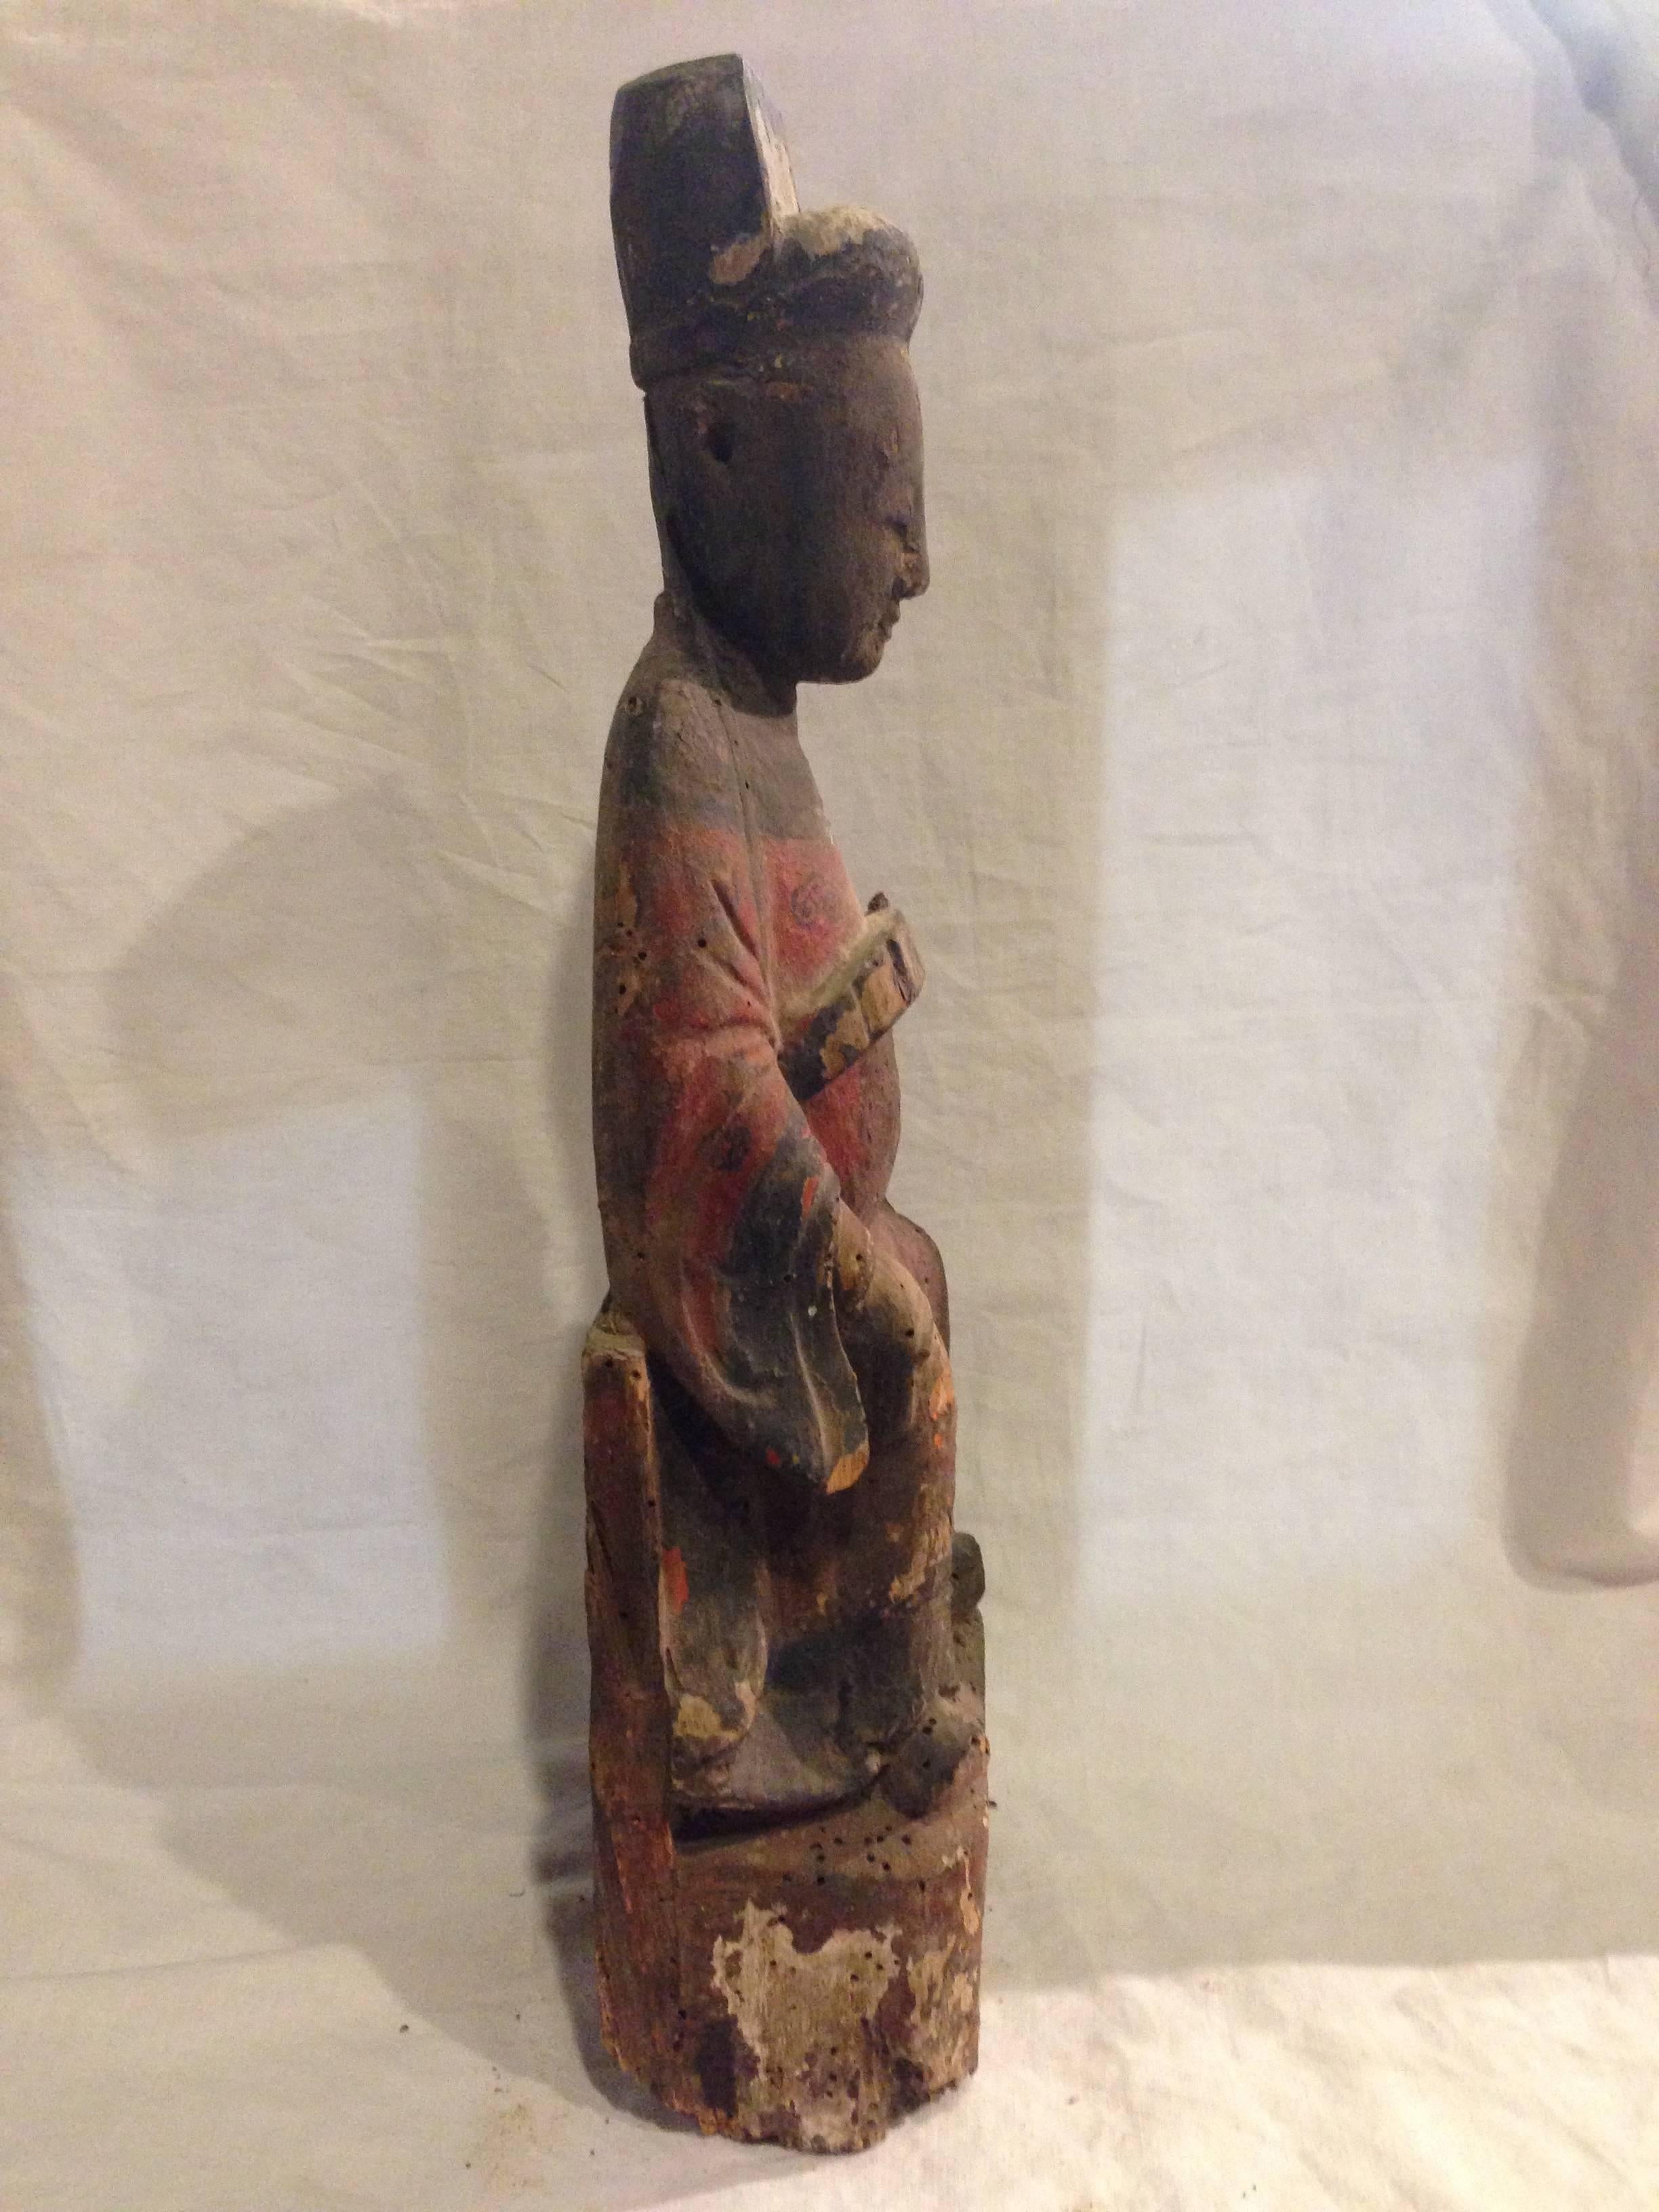 All original statue depicts an Imperial Ming Official. Beautiful contrasting colors of black and red. He has his hand on the waist band, a sign of important imperial position. Wonderful facial features reflect carver's great skill and respectful